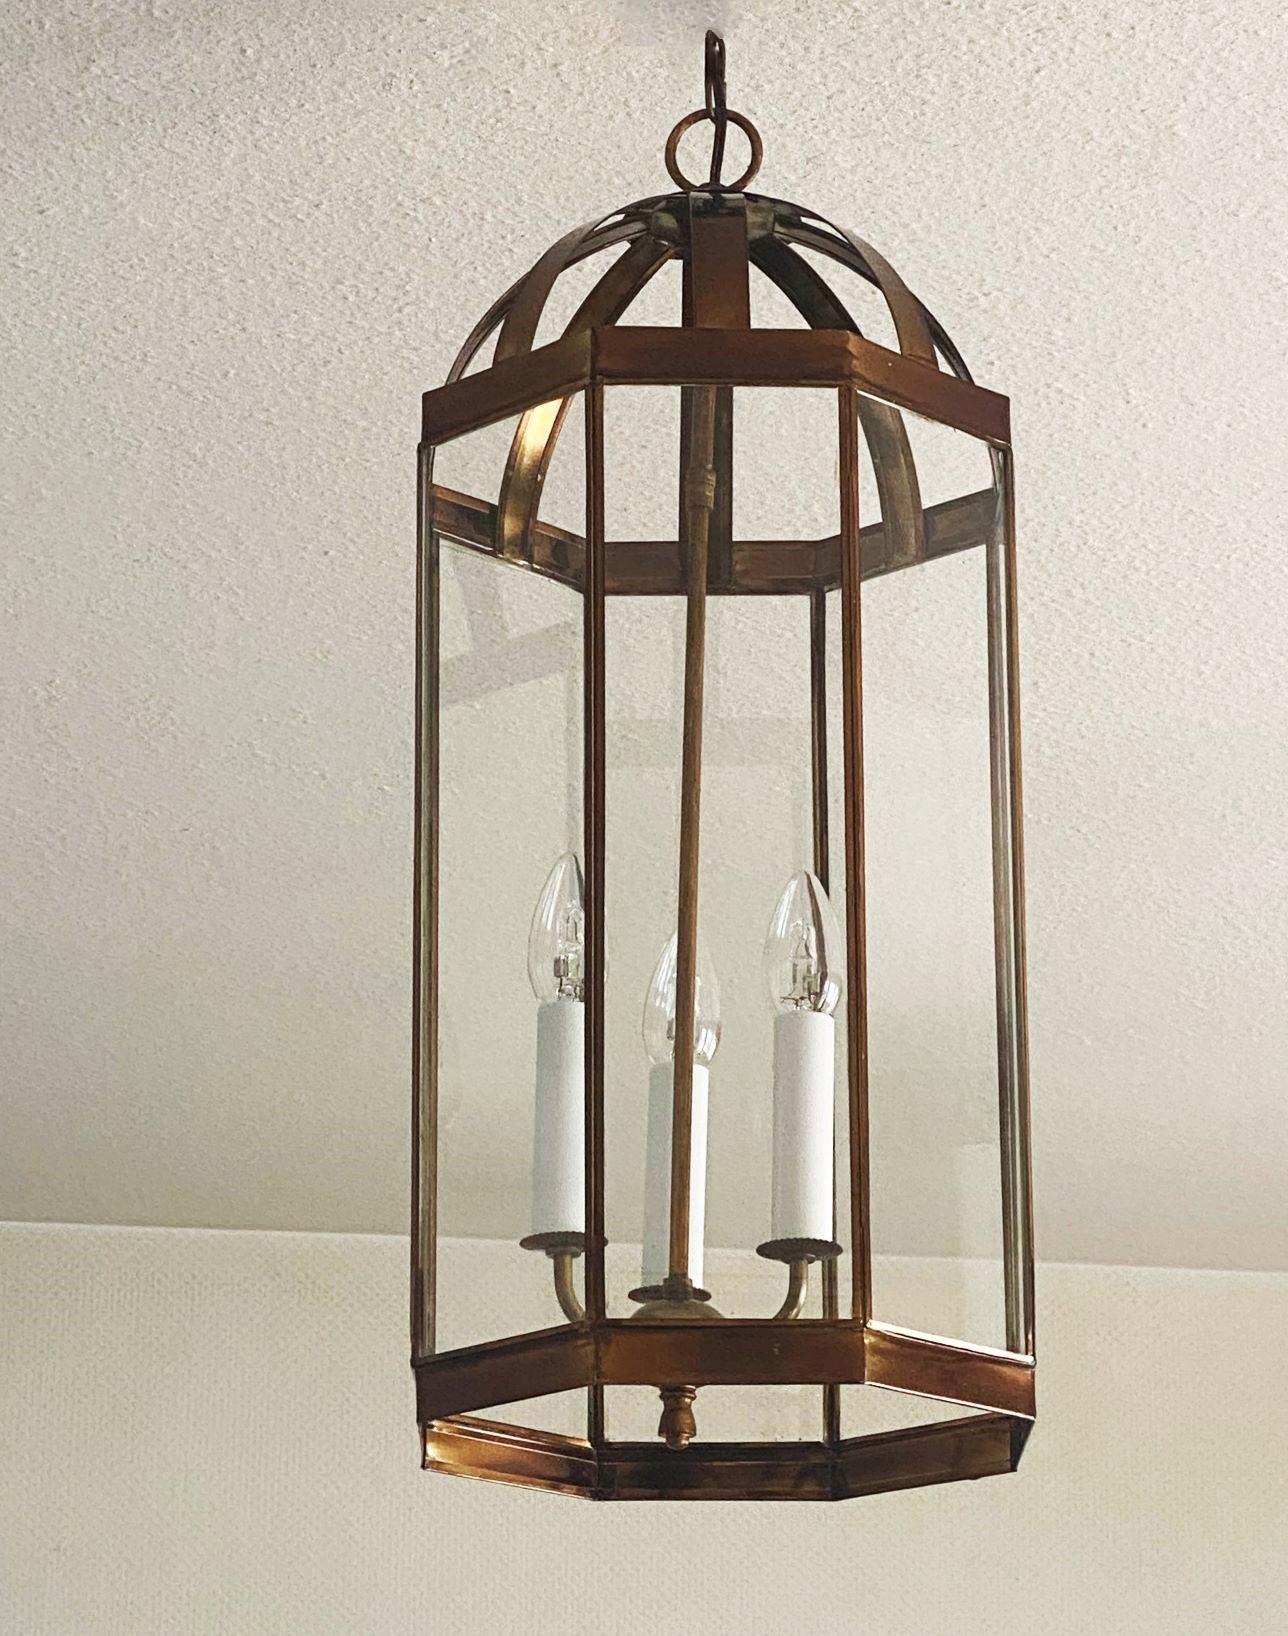 Elegant, tall Arte Deco patinated brass and glass eight-sided lantern, France late 1930s, with a central three-light candelabra cluster and eight clear glass panels. The lantern is in its original condition, no damages, rewired, arrives with 31